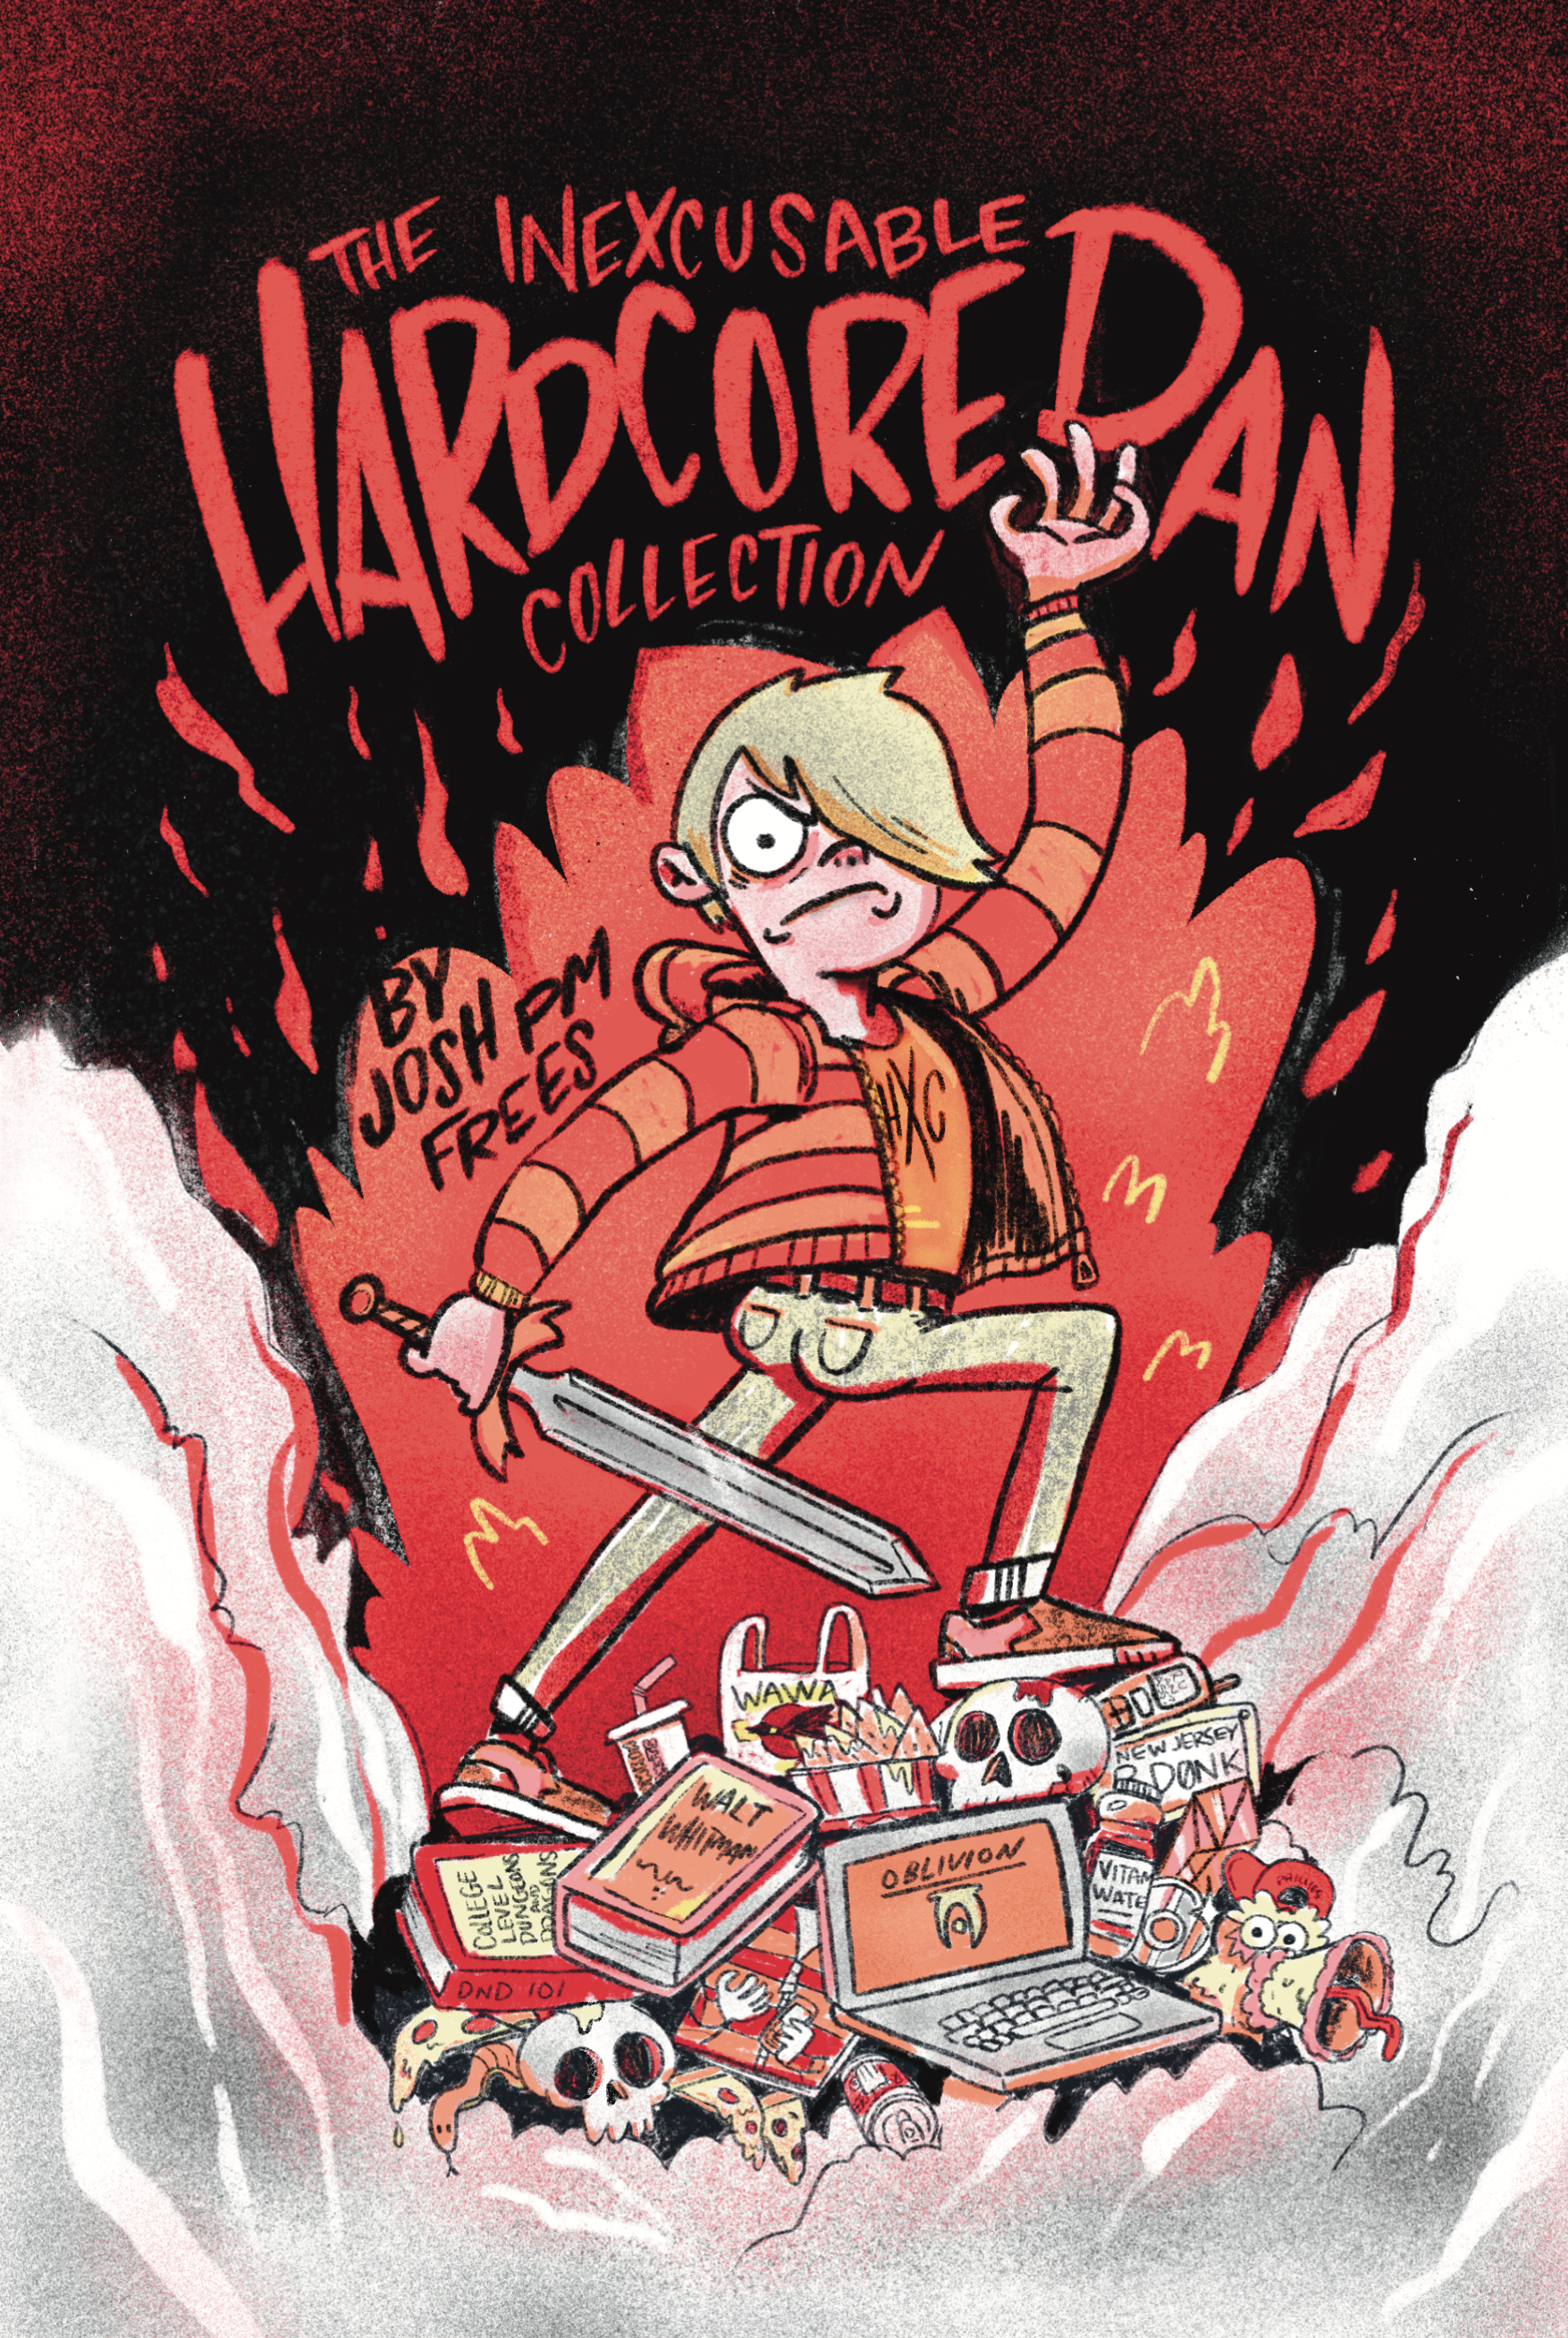 The Inexcusable Hardcore Dan Collection Cover